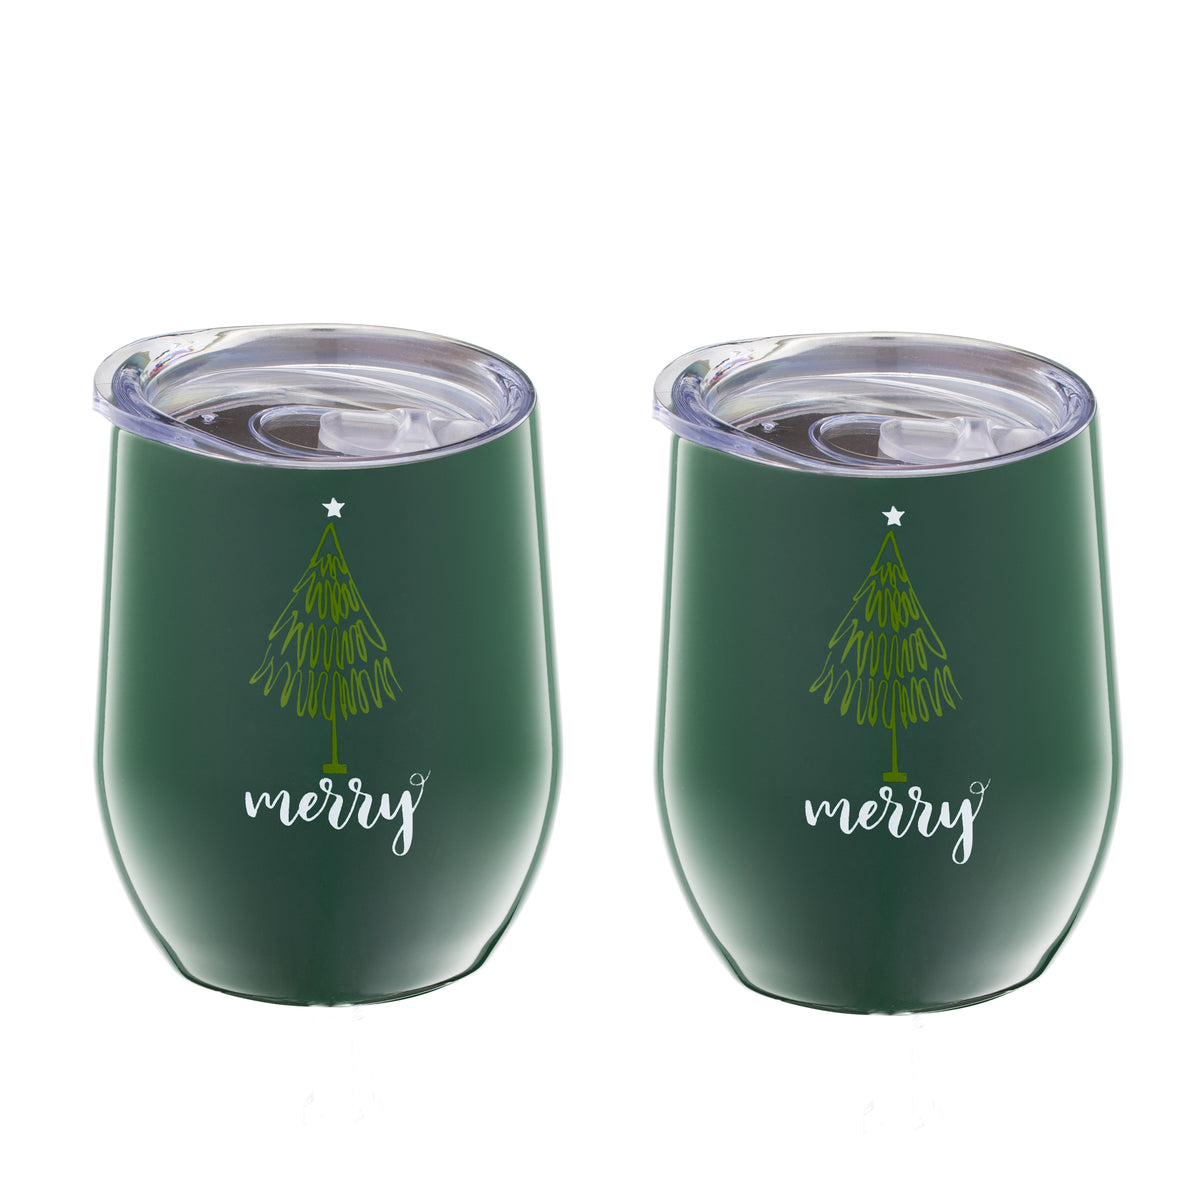 Cambridge Insulated Cocktail Tumblers, Set of 2 - Red, Green